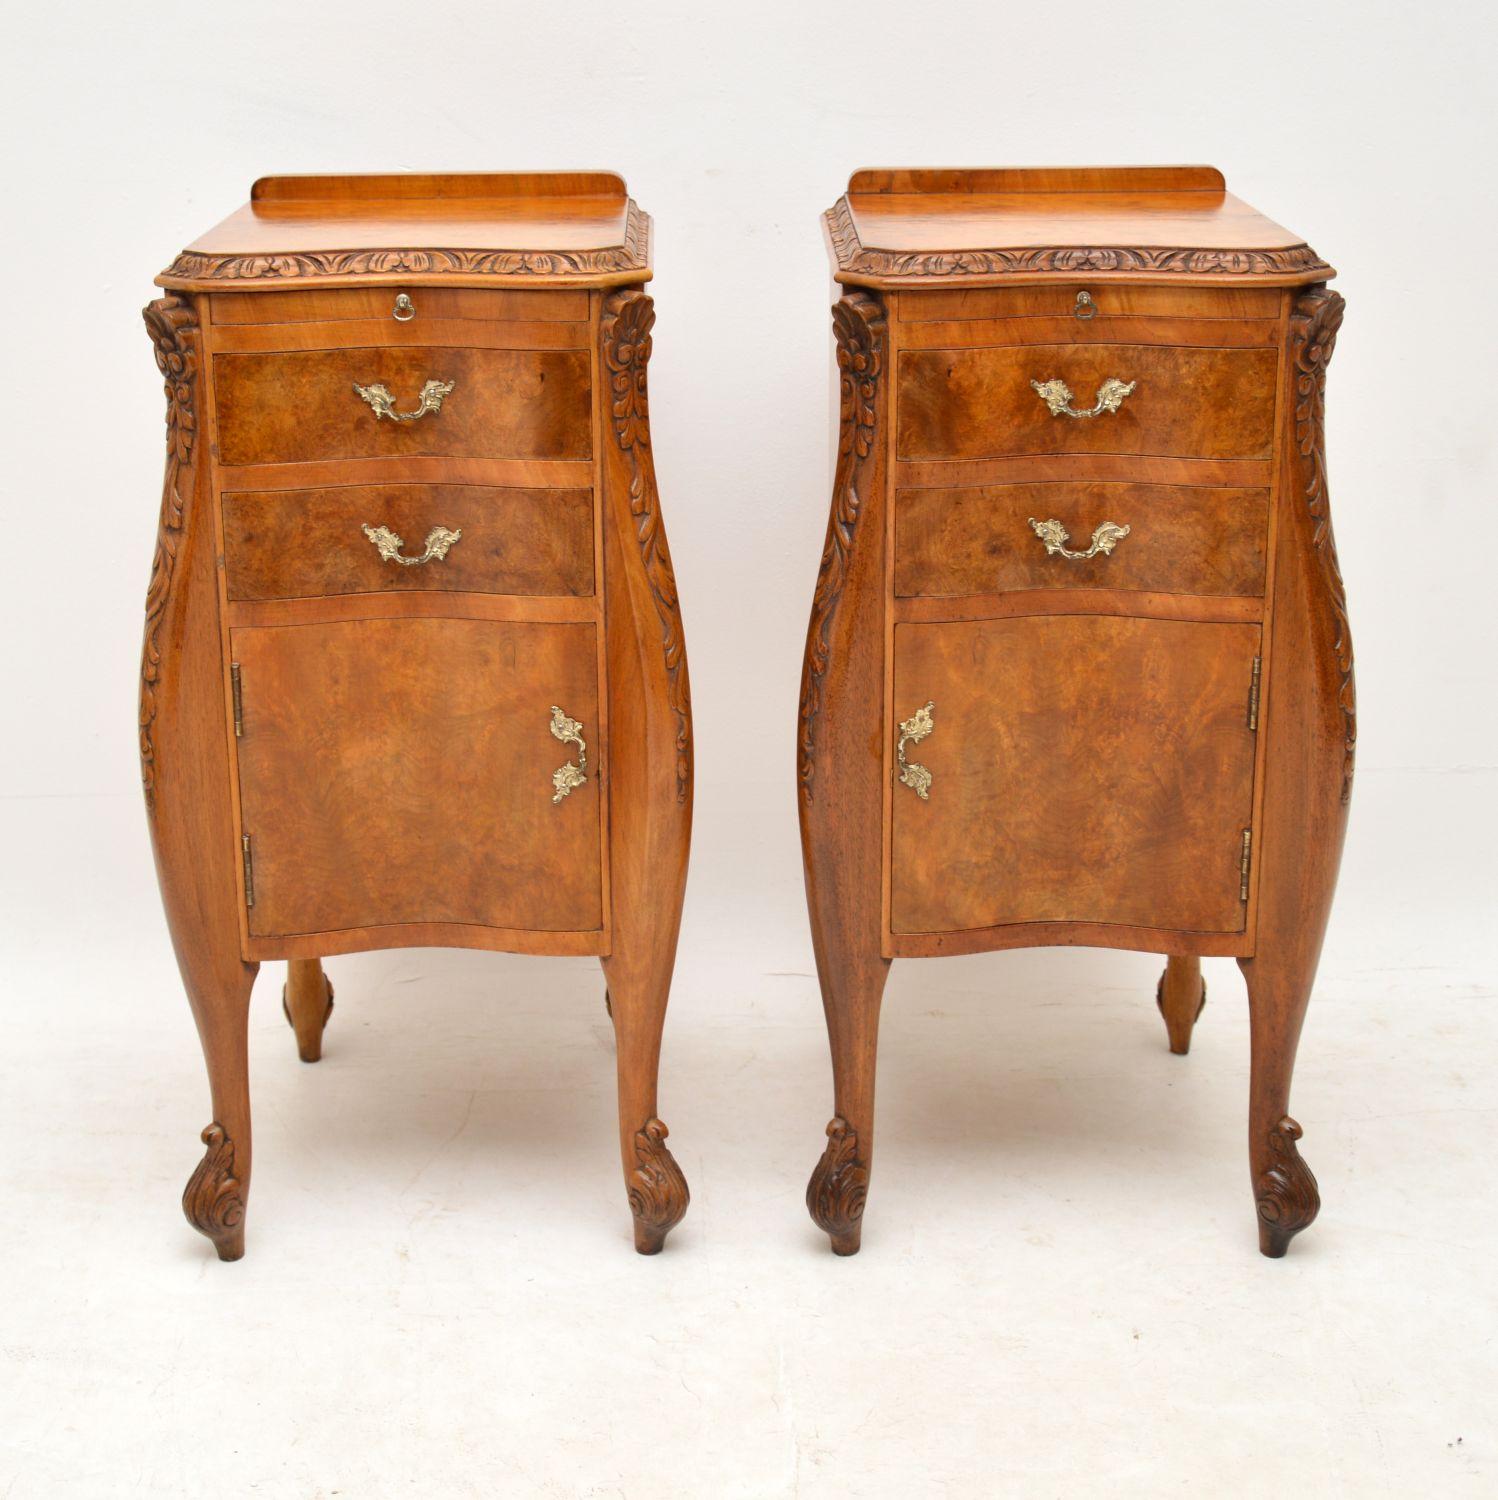 Fabulous pair of antique walnut bedside cabinets with some wonderful features and in excellent condition. They date from circa 1920s period and have just been French polished. These cabinets have some wonderful shaping and good carvings around the